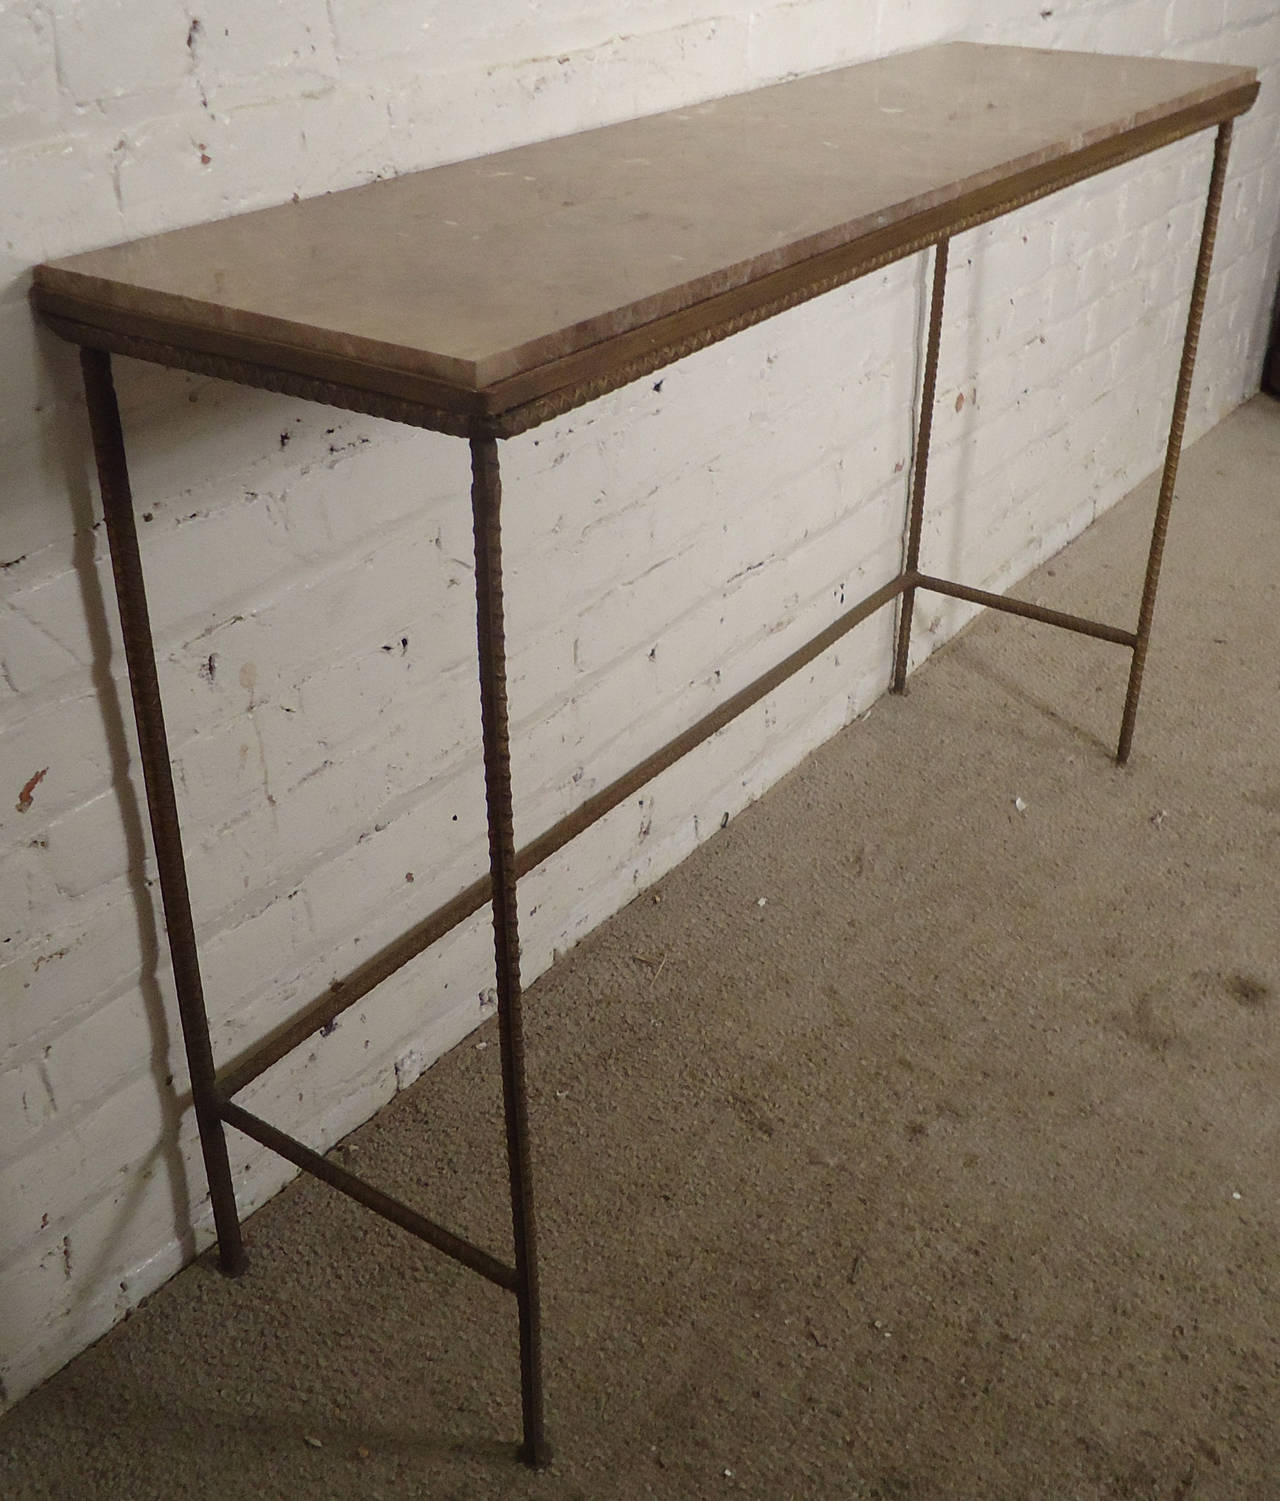 Great modern designed console table featuring a solid rebar base and a beautiful marble top. Attractive mix of clean modern lines with handsome industrial design.

(Please confirm item location - NY or NJ - with dealer)